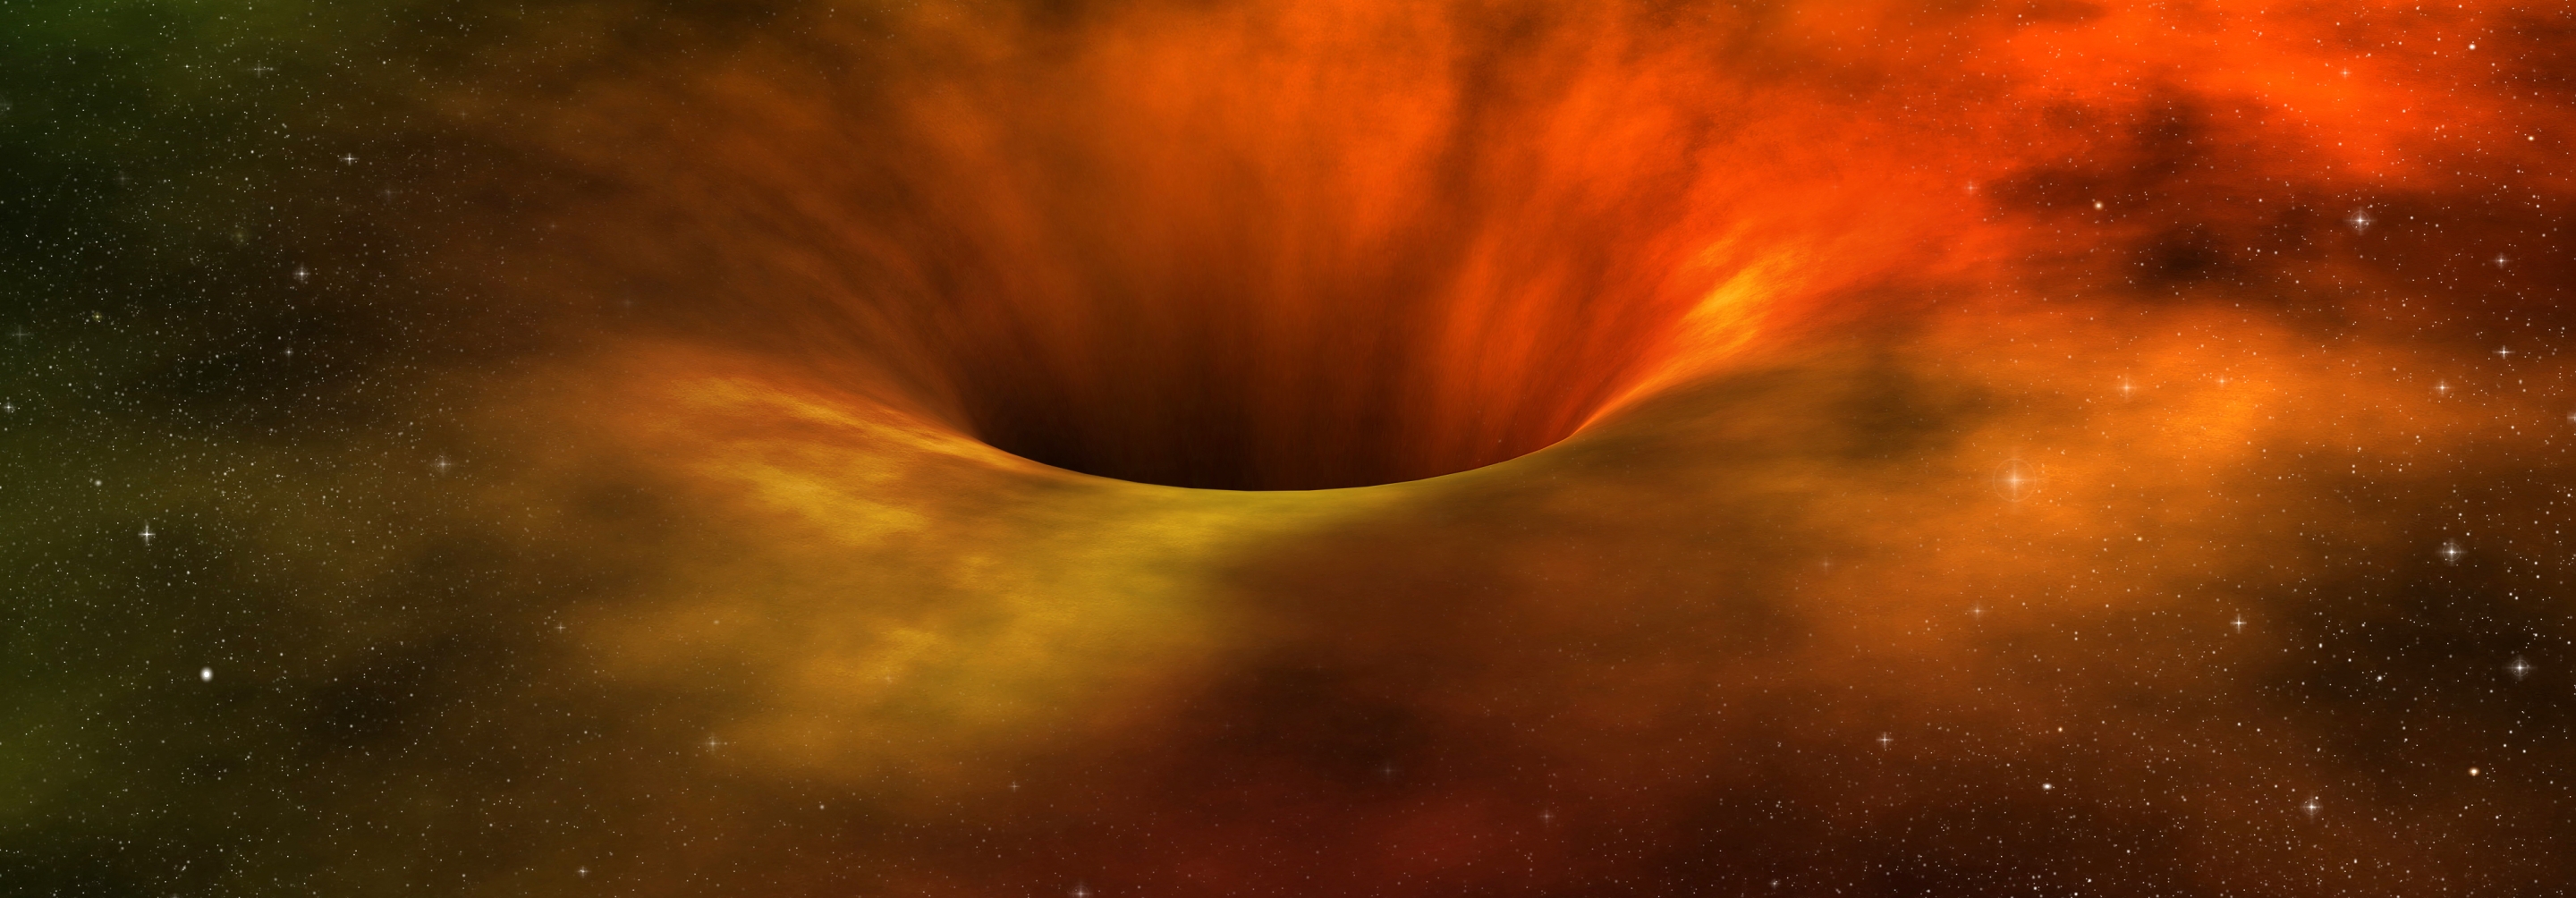 Galaxy image with orange and yellow light falling into a black hole